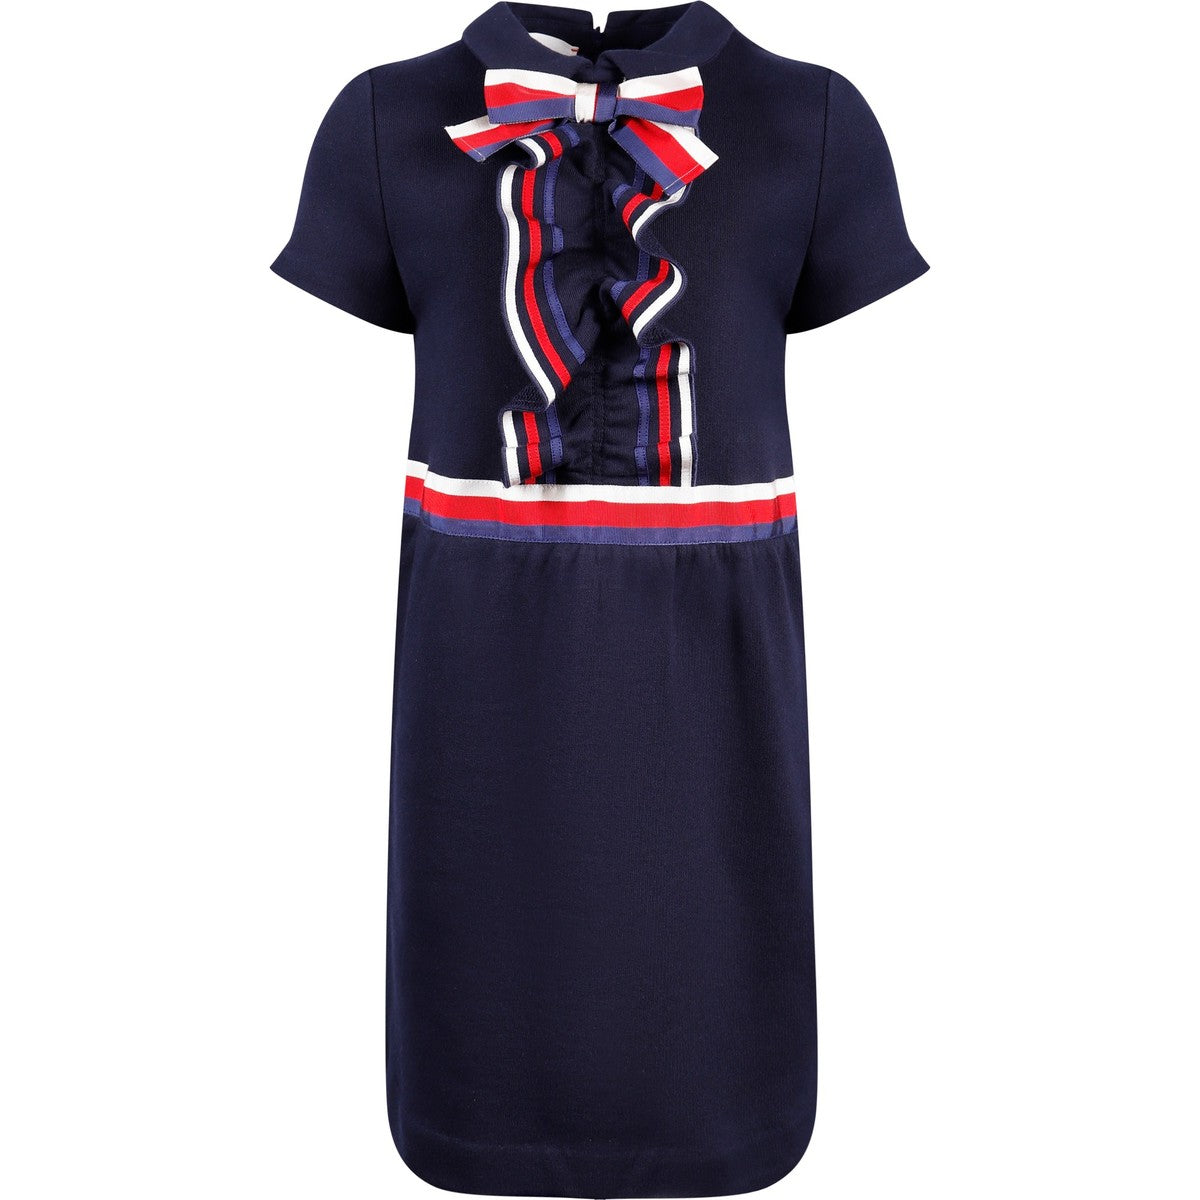 Girl GUCCI Tricolor Bow & Ruffle Dress in Navy